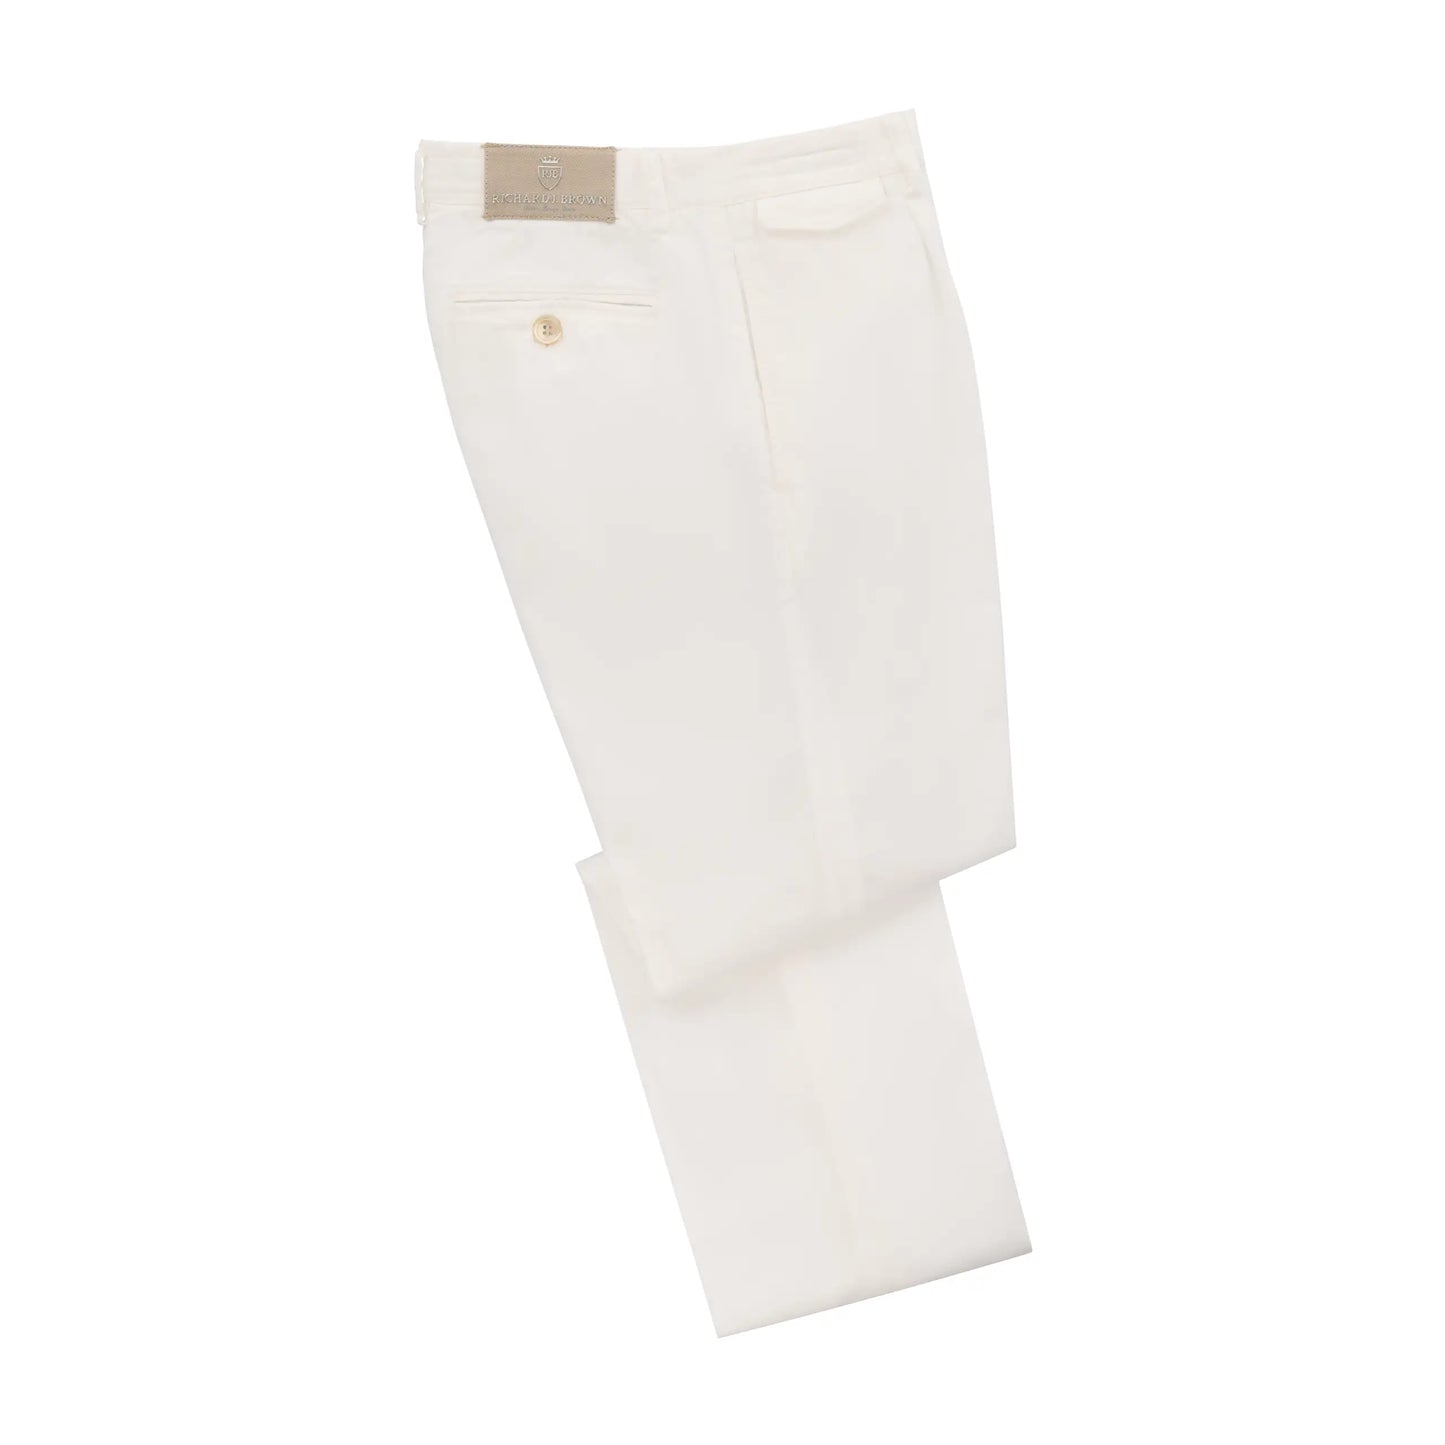 Regular-Fit Cotton Pleated White Trousers